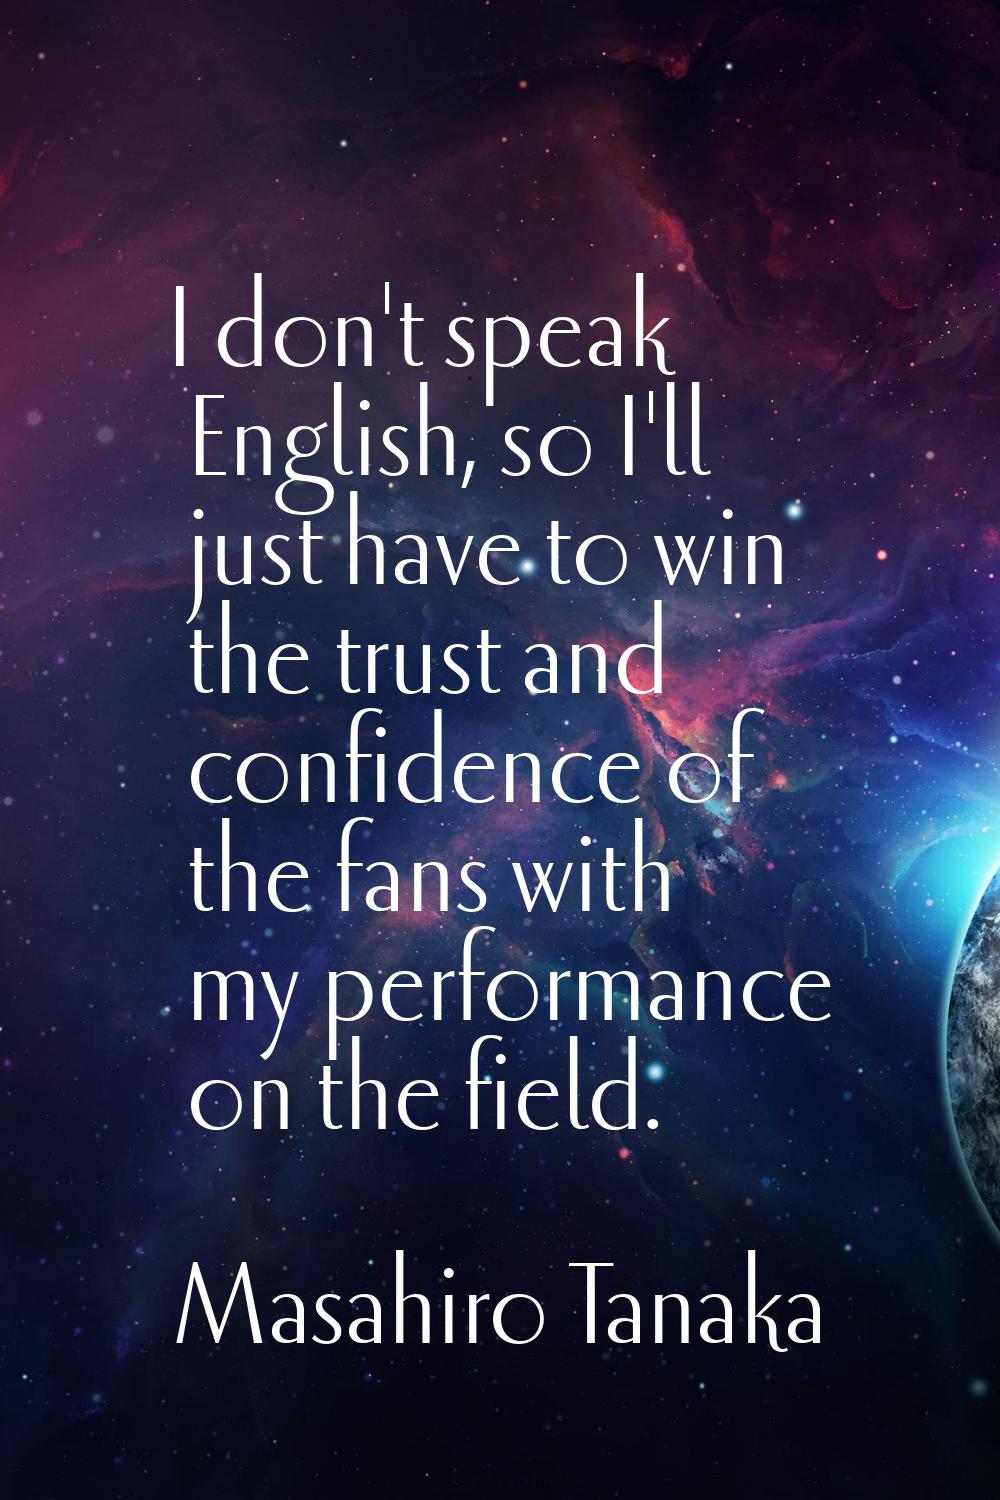 I don't speak English, so I'll just have to win the trust and confidence of the fans with my perfor